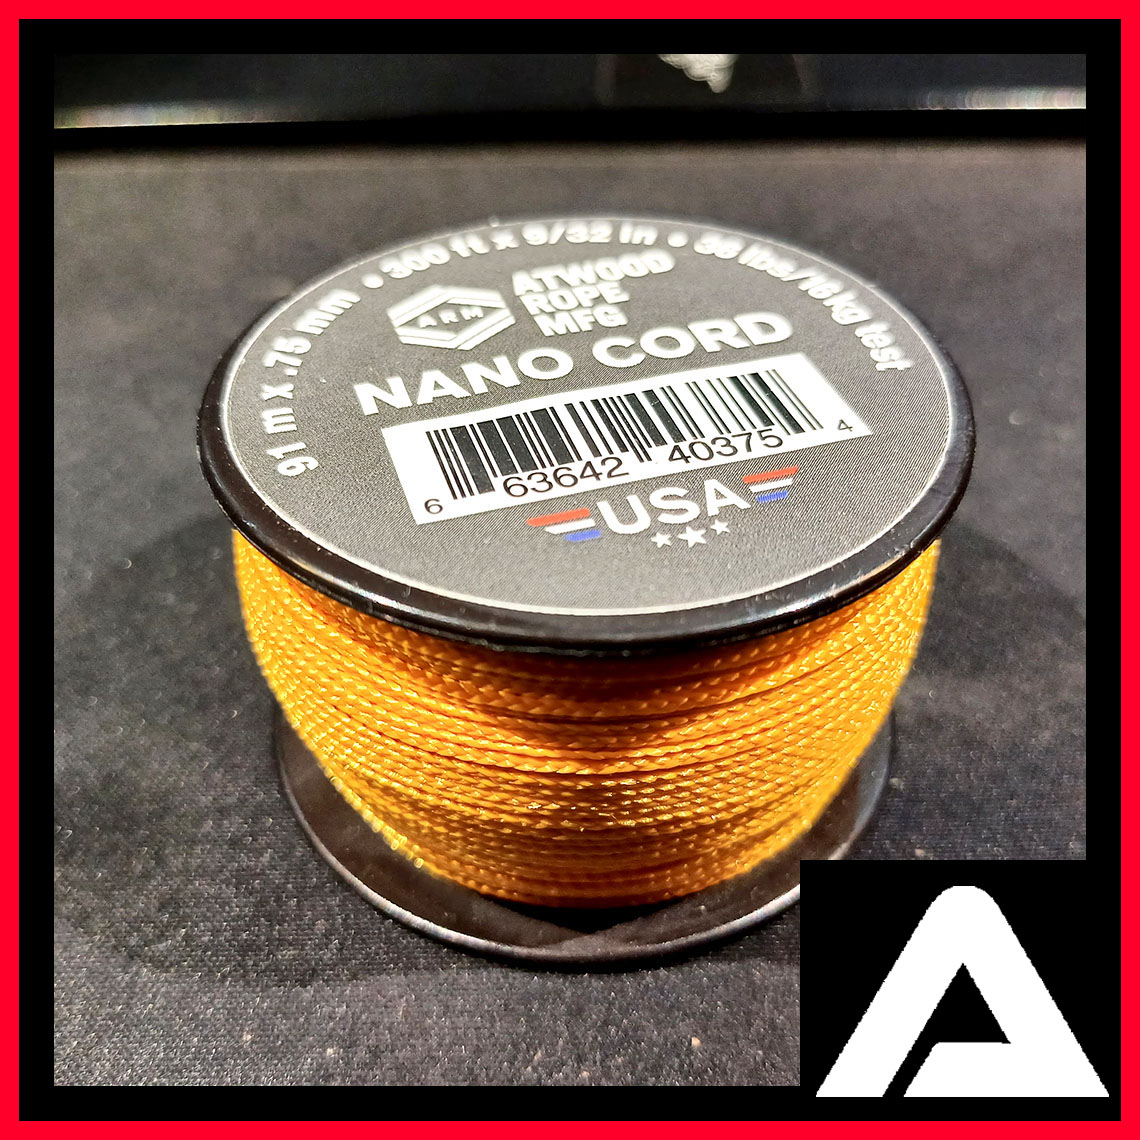 Atwood Nano Cord - 10ft Length - Made in the USA - 0.75mm Thick - Nanocord  rope